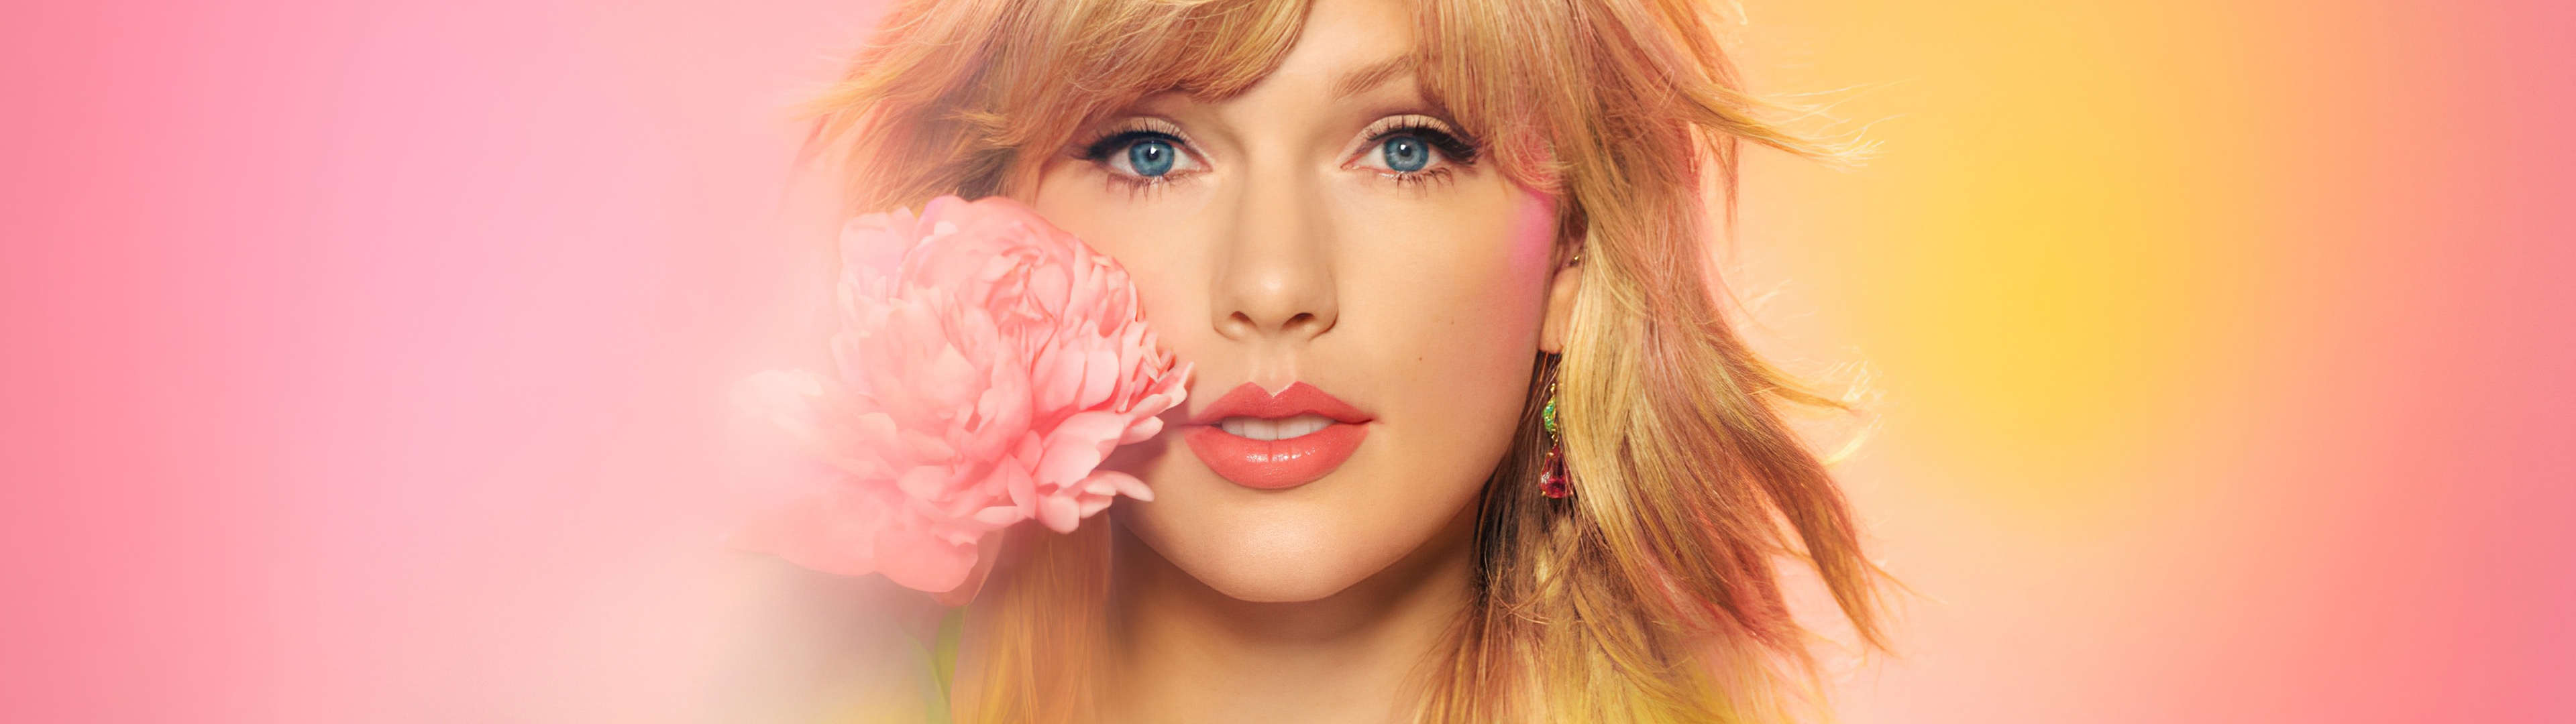 Taylor Swift PC Wallpapers  Wallpaper Cave